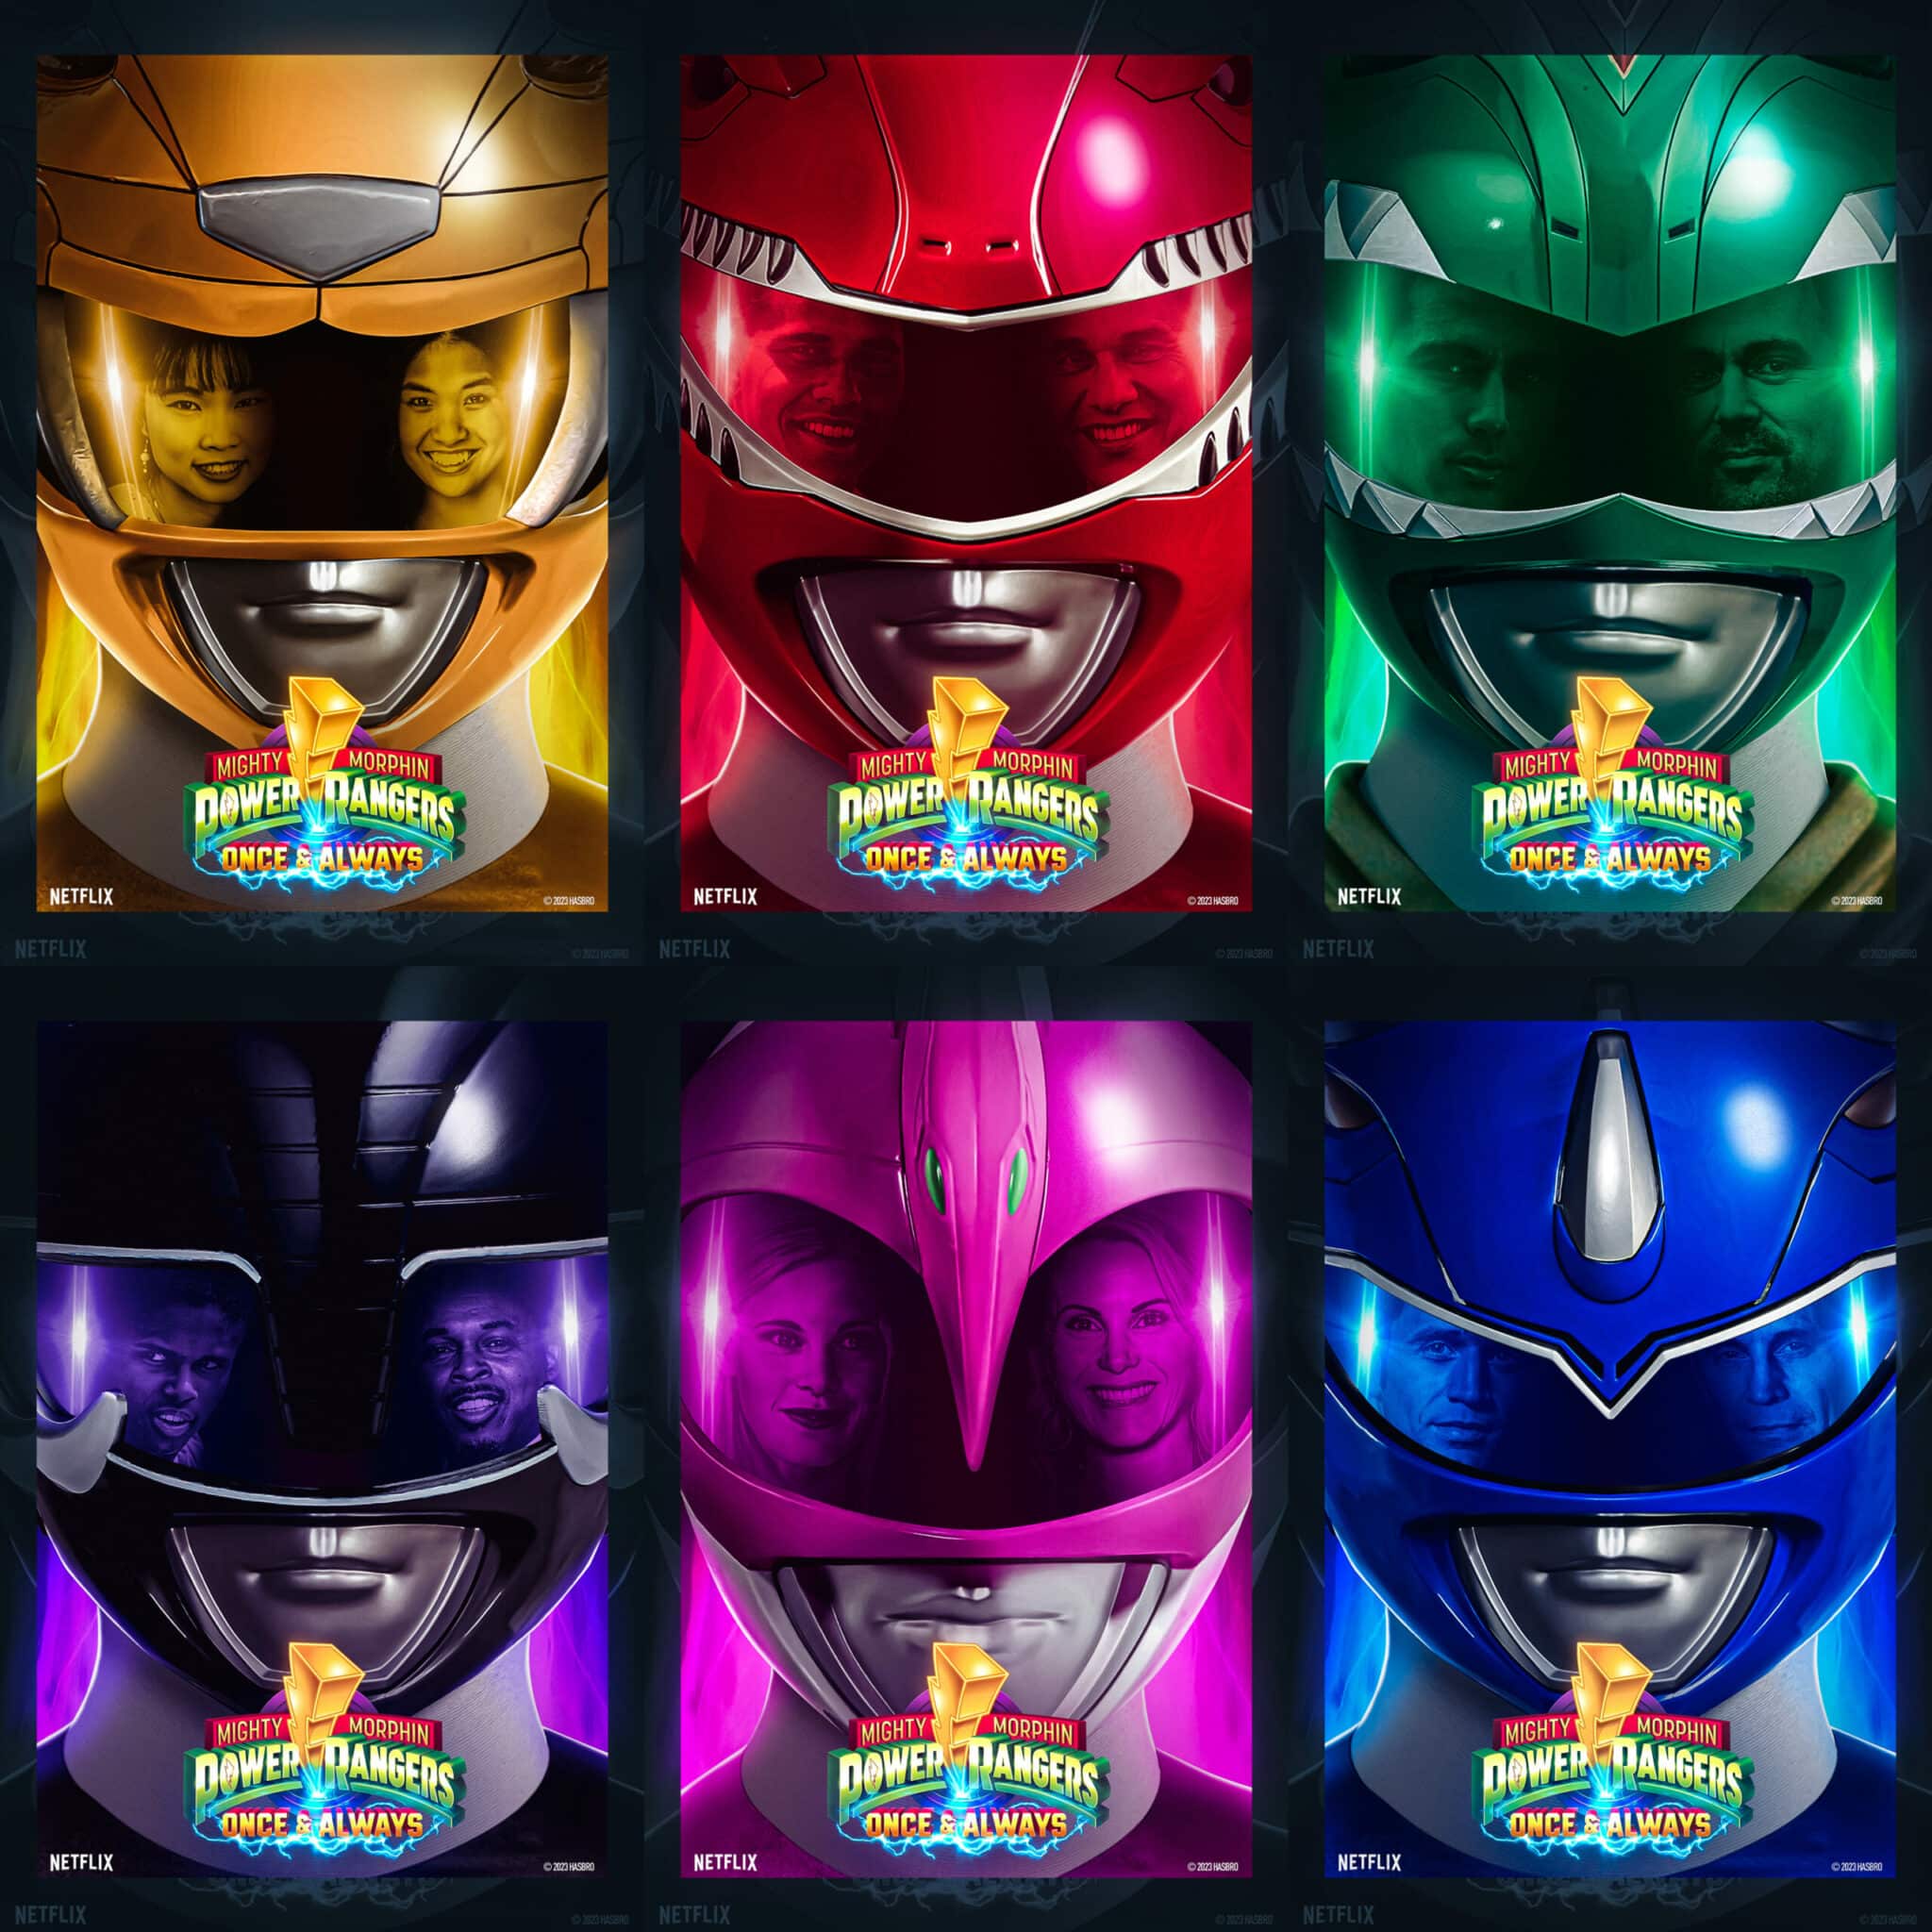 Power Rangers Once And Always Nortfx PosterSpy